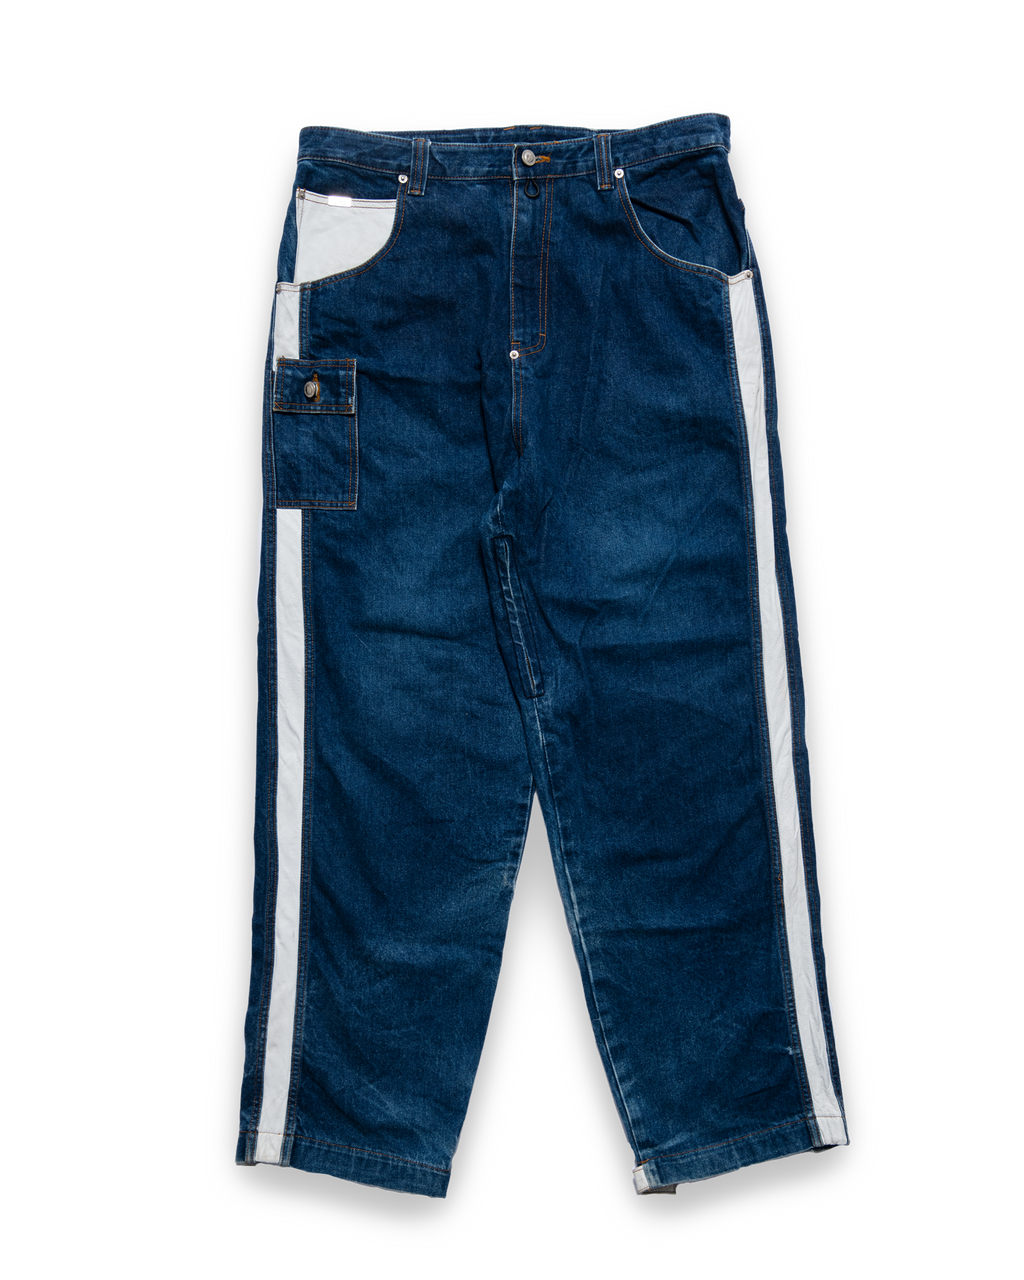 Baggy Denim Jeans White Leather